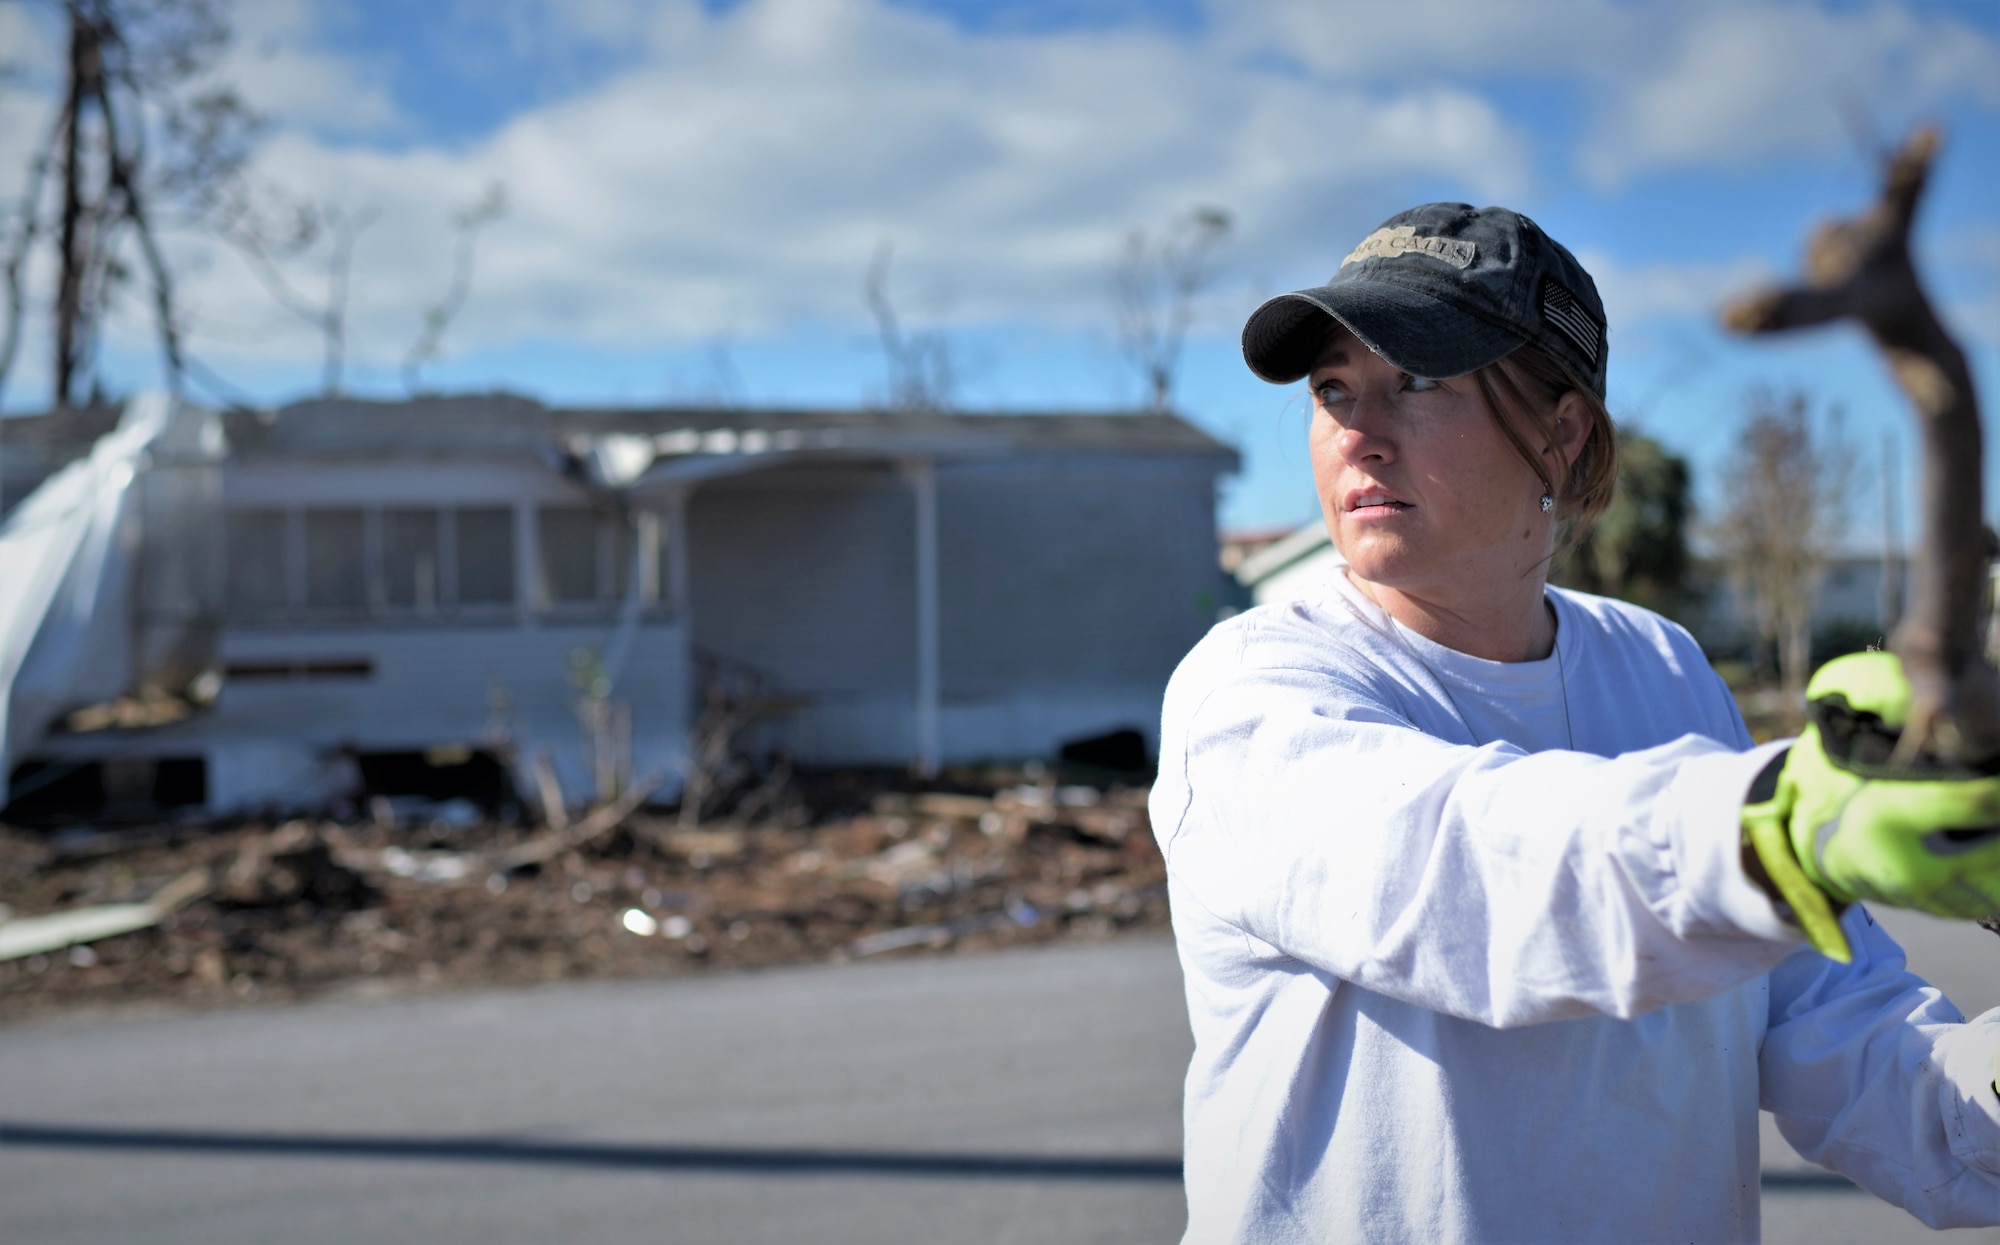 Jennifer Whitesides, a bioenvironmental engineer technician with the 325th Aerospace Medicine Squadron, helps clean Under the Palms Park in Mexico Beach, Fla. Dec. 16, 2018. Thirty nine volunteers from Tyndall and Eglin Air Force Bases came together to help clean Mexico Beach, one of the communities hit the hardest by Hurricane Michael. The volunteers were able to clean up more than 40 cubic yards of debris within four hours. (U.S. Air Force photo by Tech. Sgt. Sara Keller)